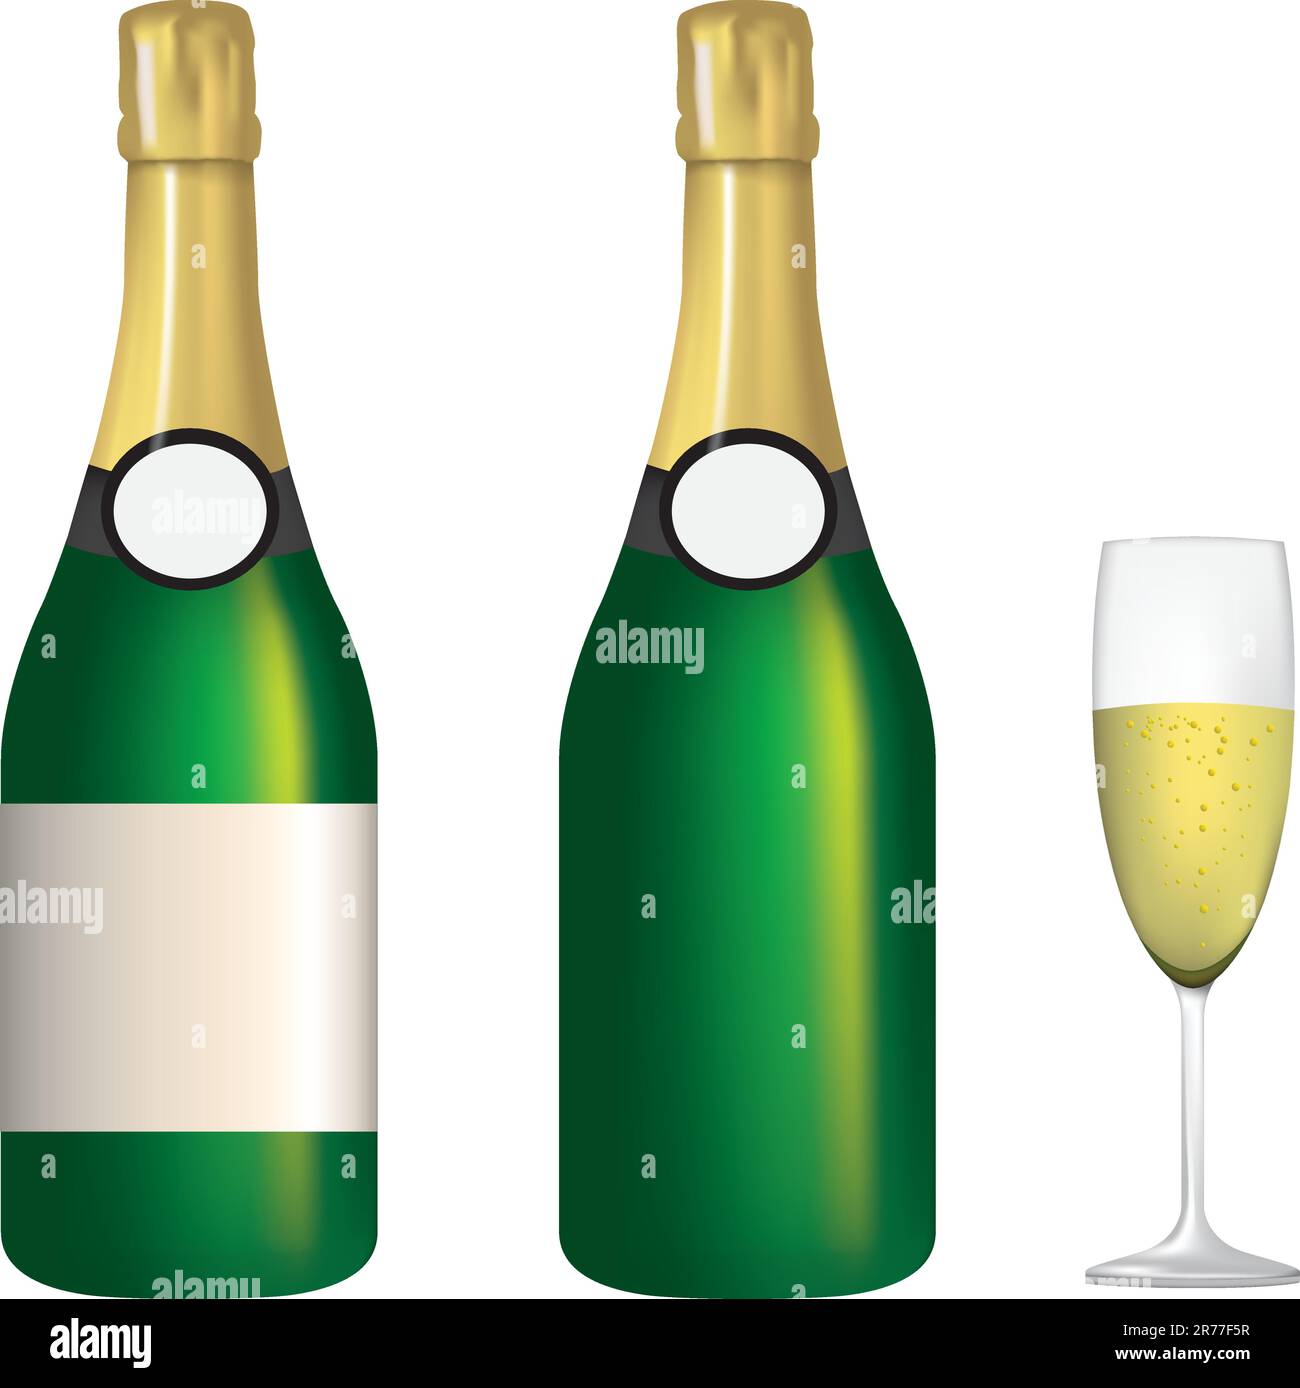 illustration of a champagne bottle with and without label and glass Stock Vector